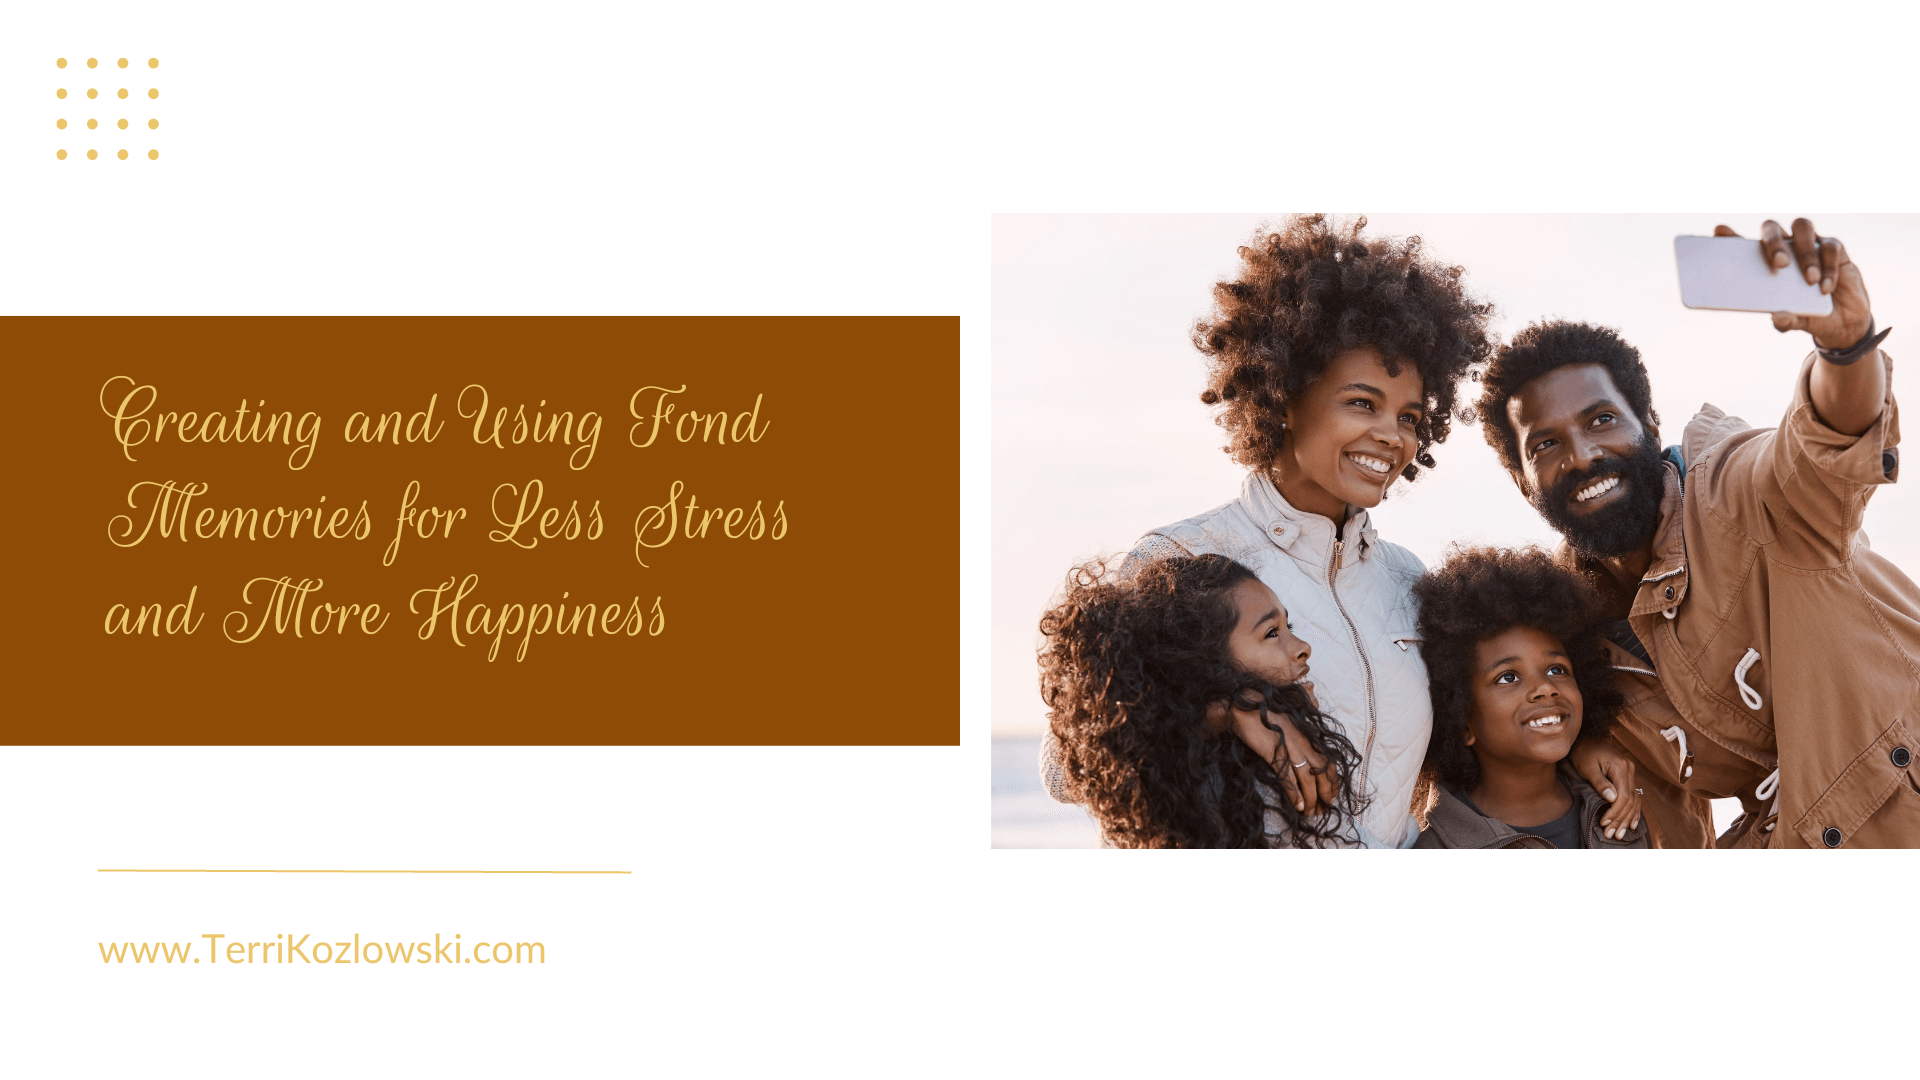 Creating and Using Fond Memories for Less Stress and More Happiness